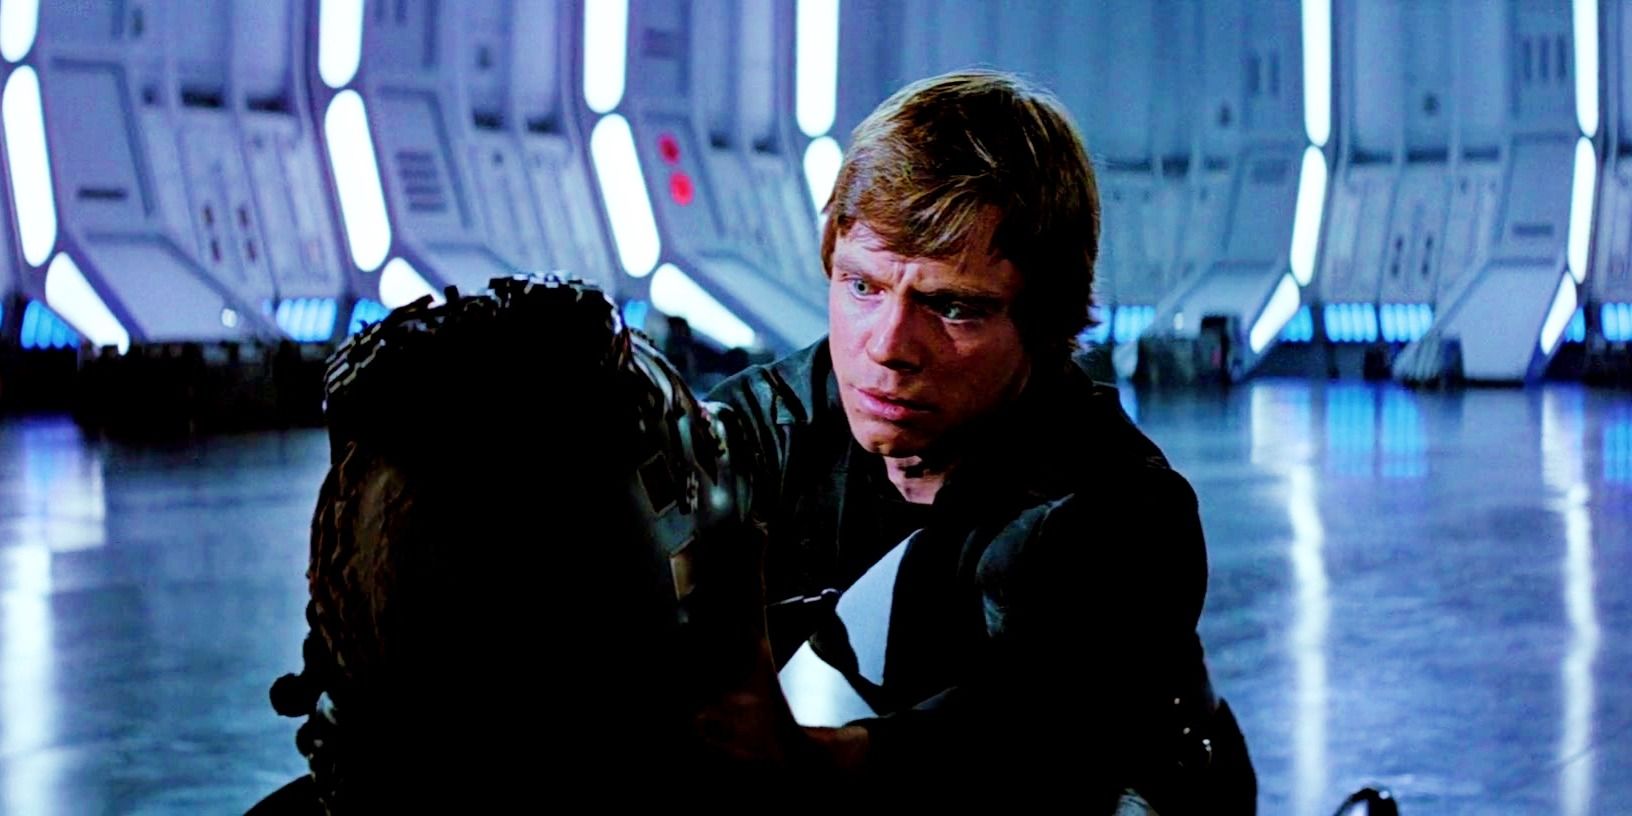 Luke looking down at a dying Darth Vader in shock at the end of Return of the Jedi